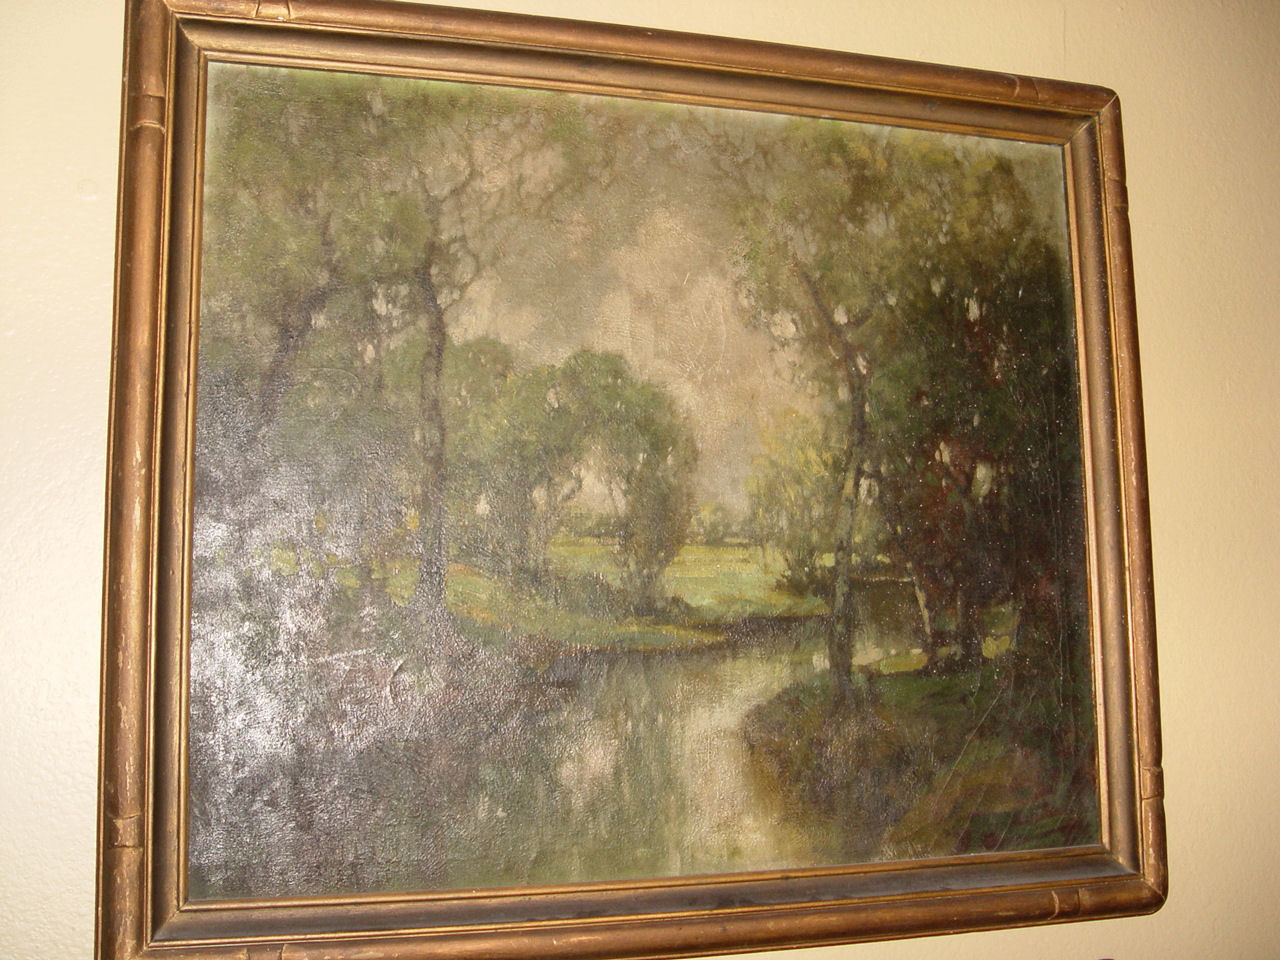 Antique Oil On Canvas,
                                        Forest Creek Landscape in
                                        Morning Light Painting